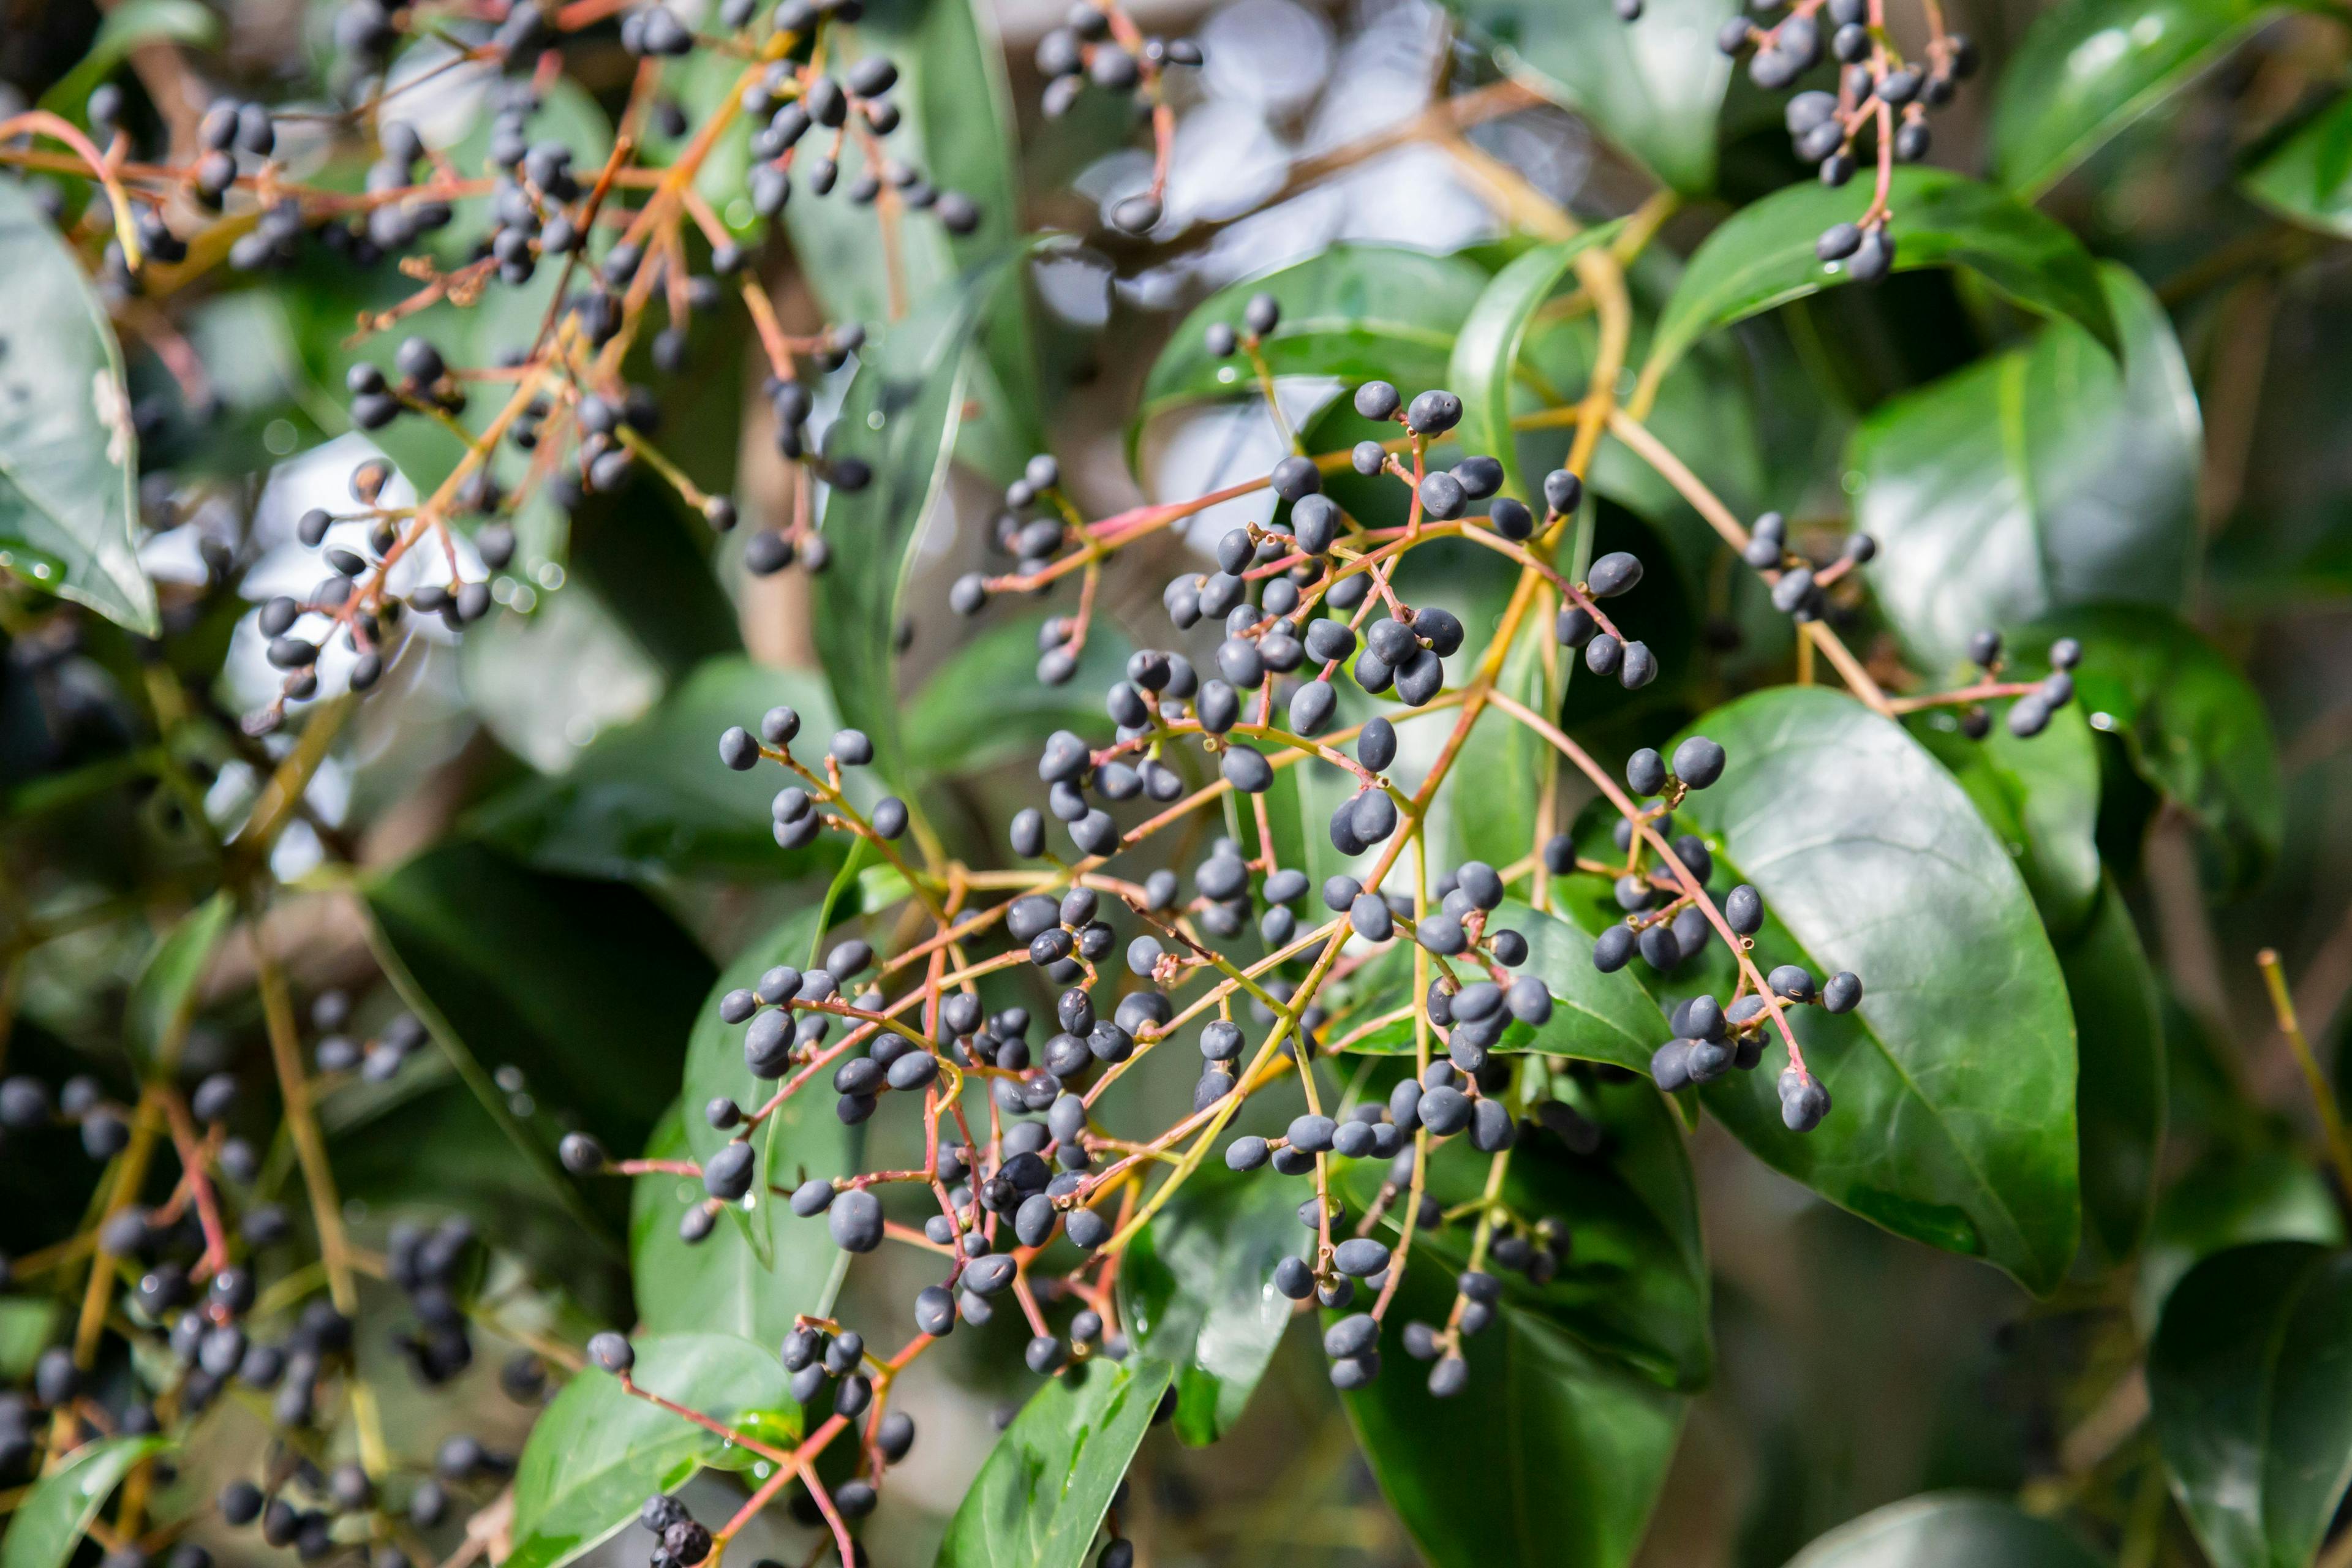 Ligustrum tree with blue berries on a tree branch | Image Credit: © Anna - stock.adobe.com